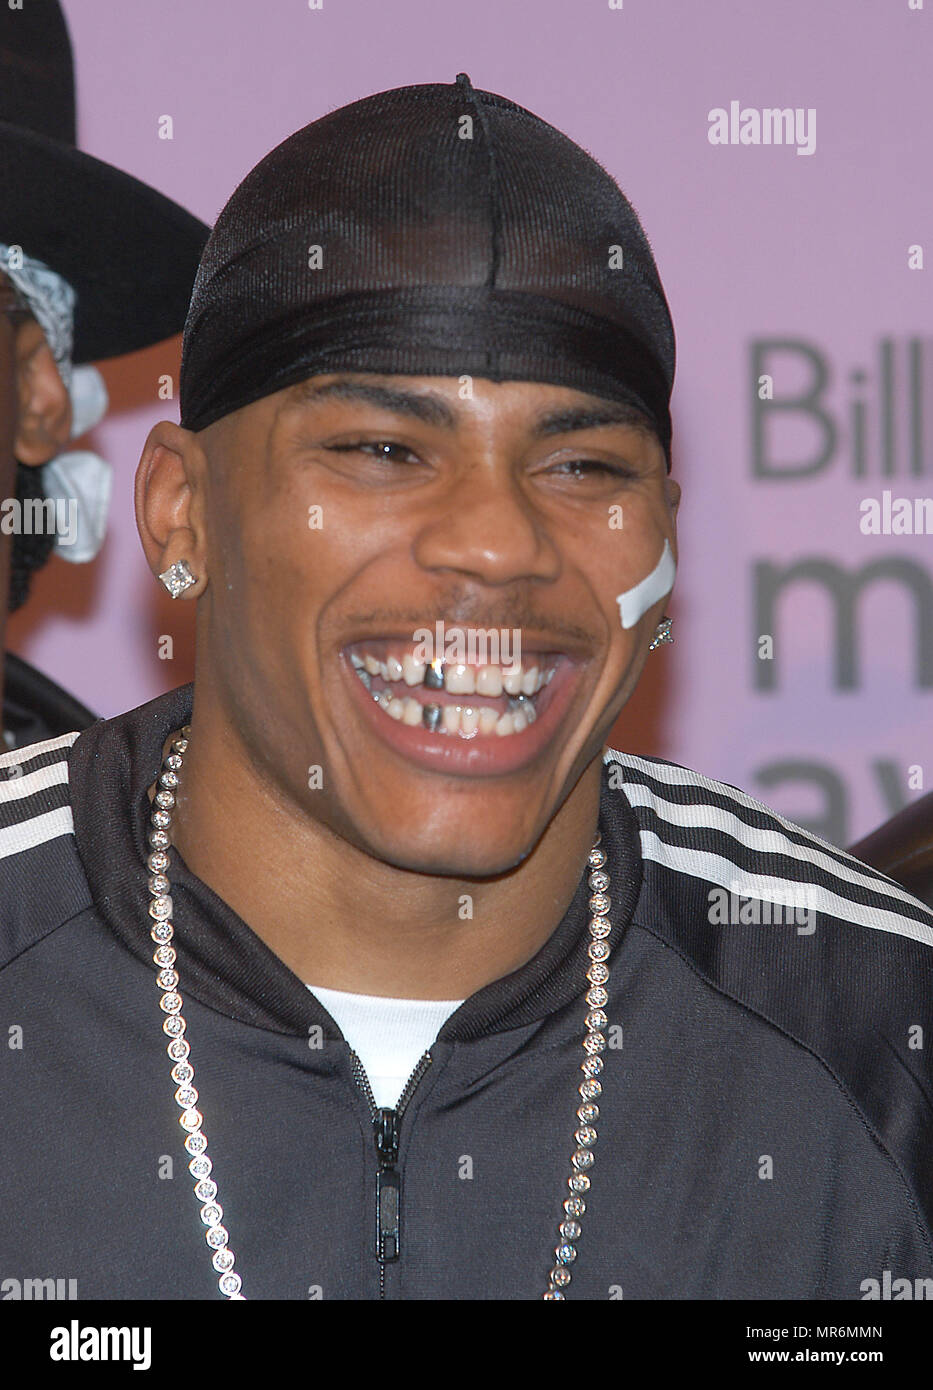 Nelly backstage at the 2002 Fox Billboard Music Awards held at the MGM Grand Hotel in Las Vegas, NV., December 9, 2002.  Nelly05 Red Carpet Event, Vertical, USA, Film Industry, Celebrities,  Photography, Bestof, Arts Culture and Entertainment, Topix Celebrities fashion /  Vertical, Best of, Event in Hollywood Life - California,  Red Carpet and backstage, USA, Film Industry, Celebrities,  movie celebrities, TV celebrities, Music celebrities, Photography, Bestof, Arts Culture and Entertainment,  Topix, headshot, vertical, one person,, from the year , 2002, inquiry tsuni@Gamma-USA.com Stock Photo